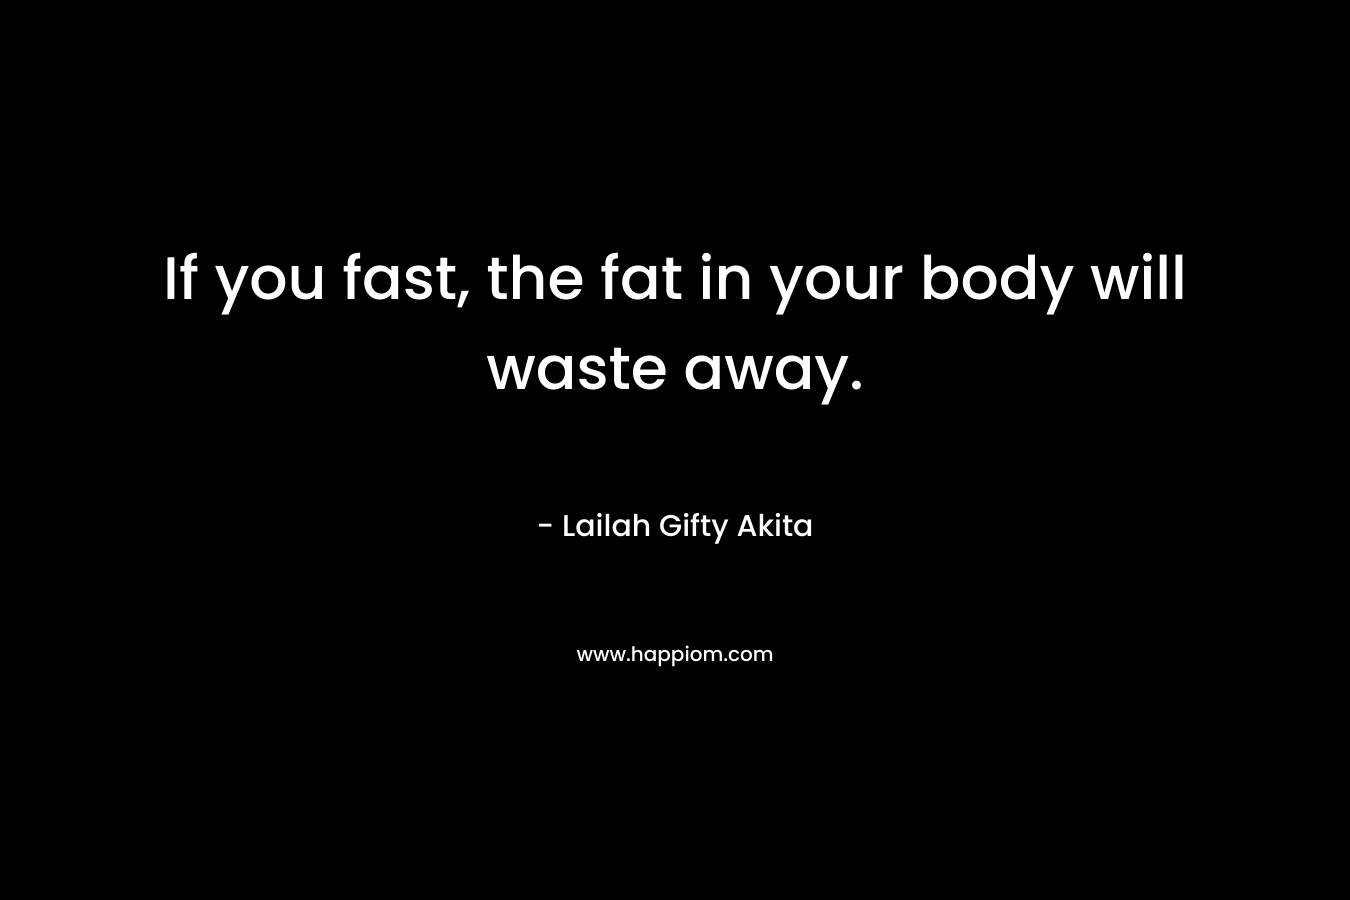 If you fast, the fat in your body will waste away.